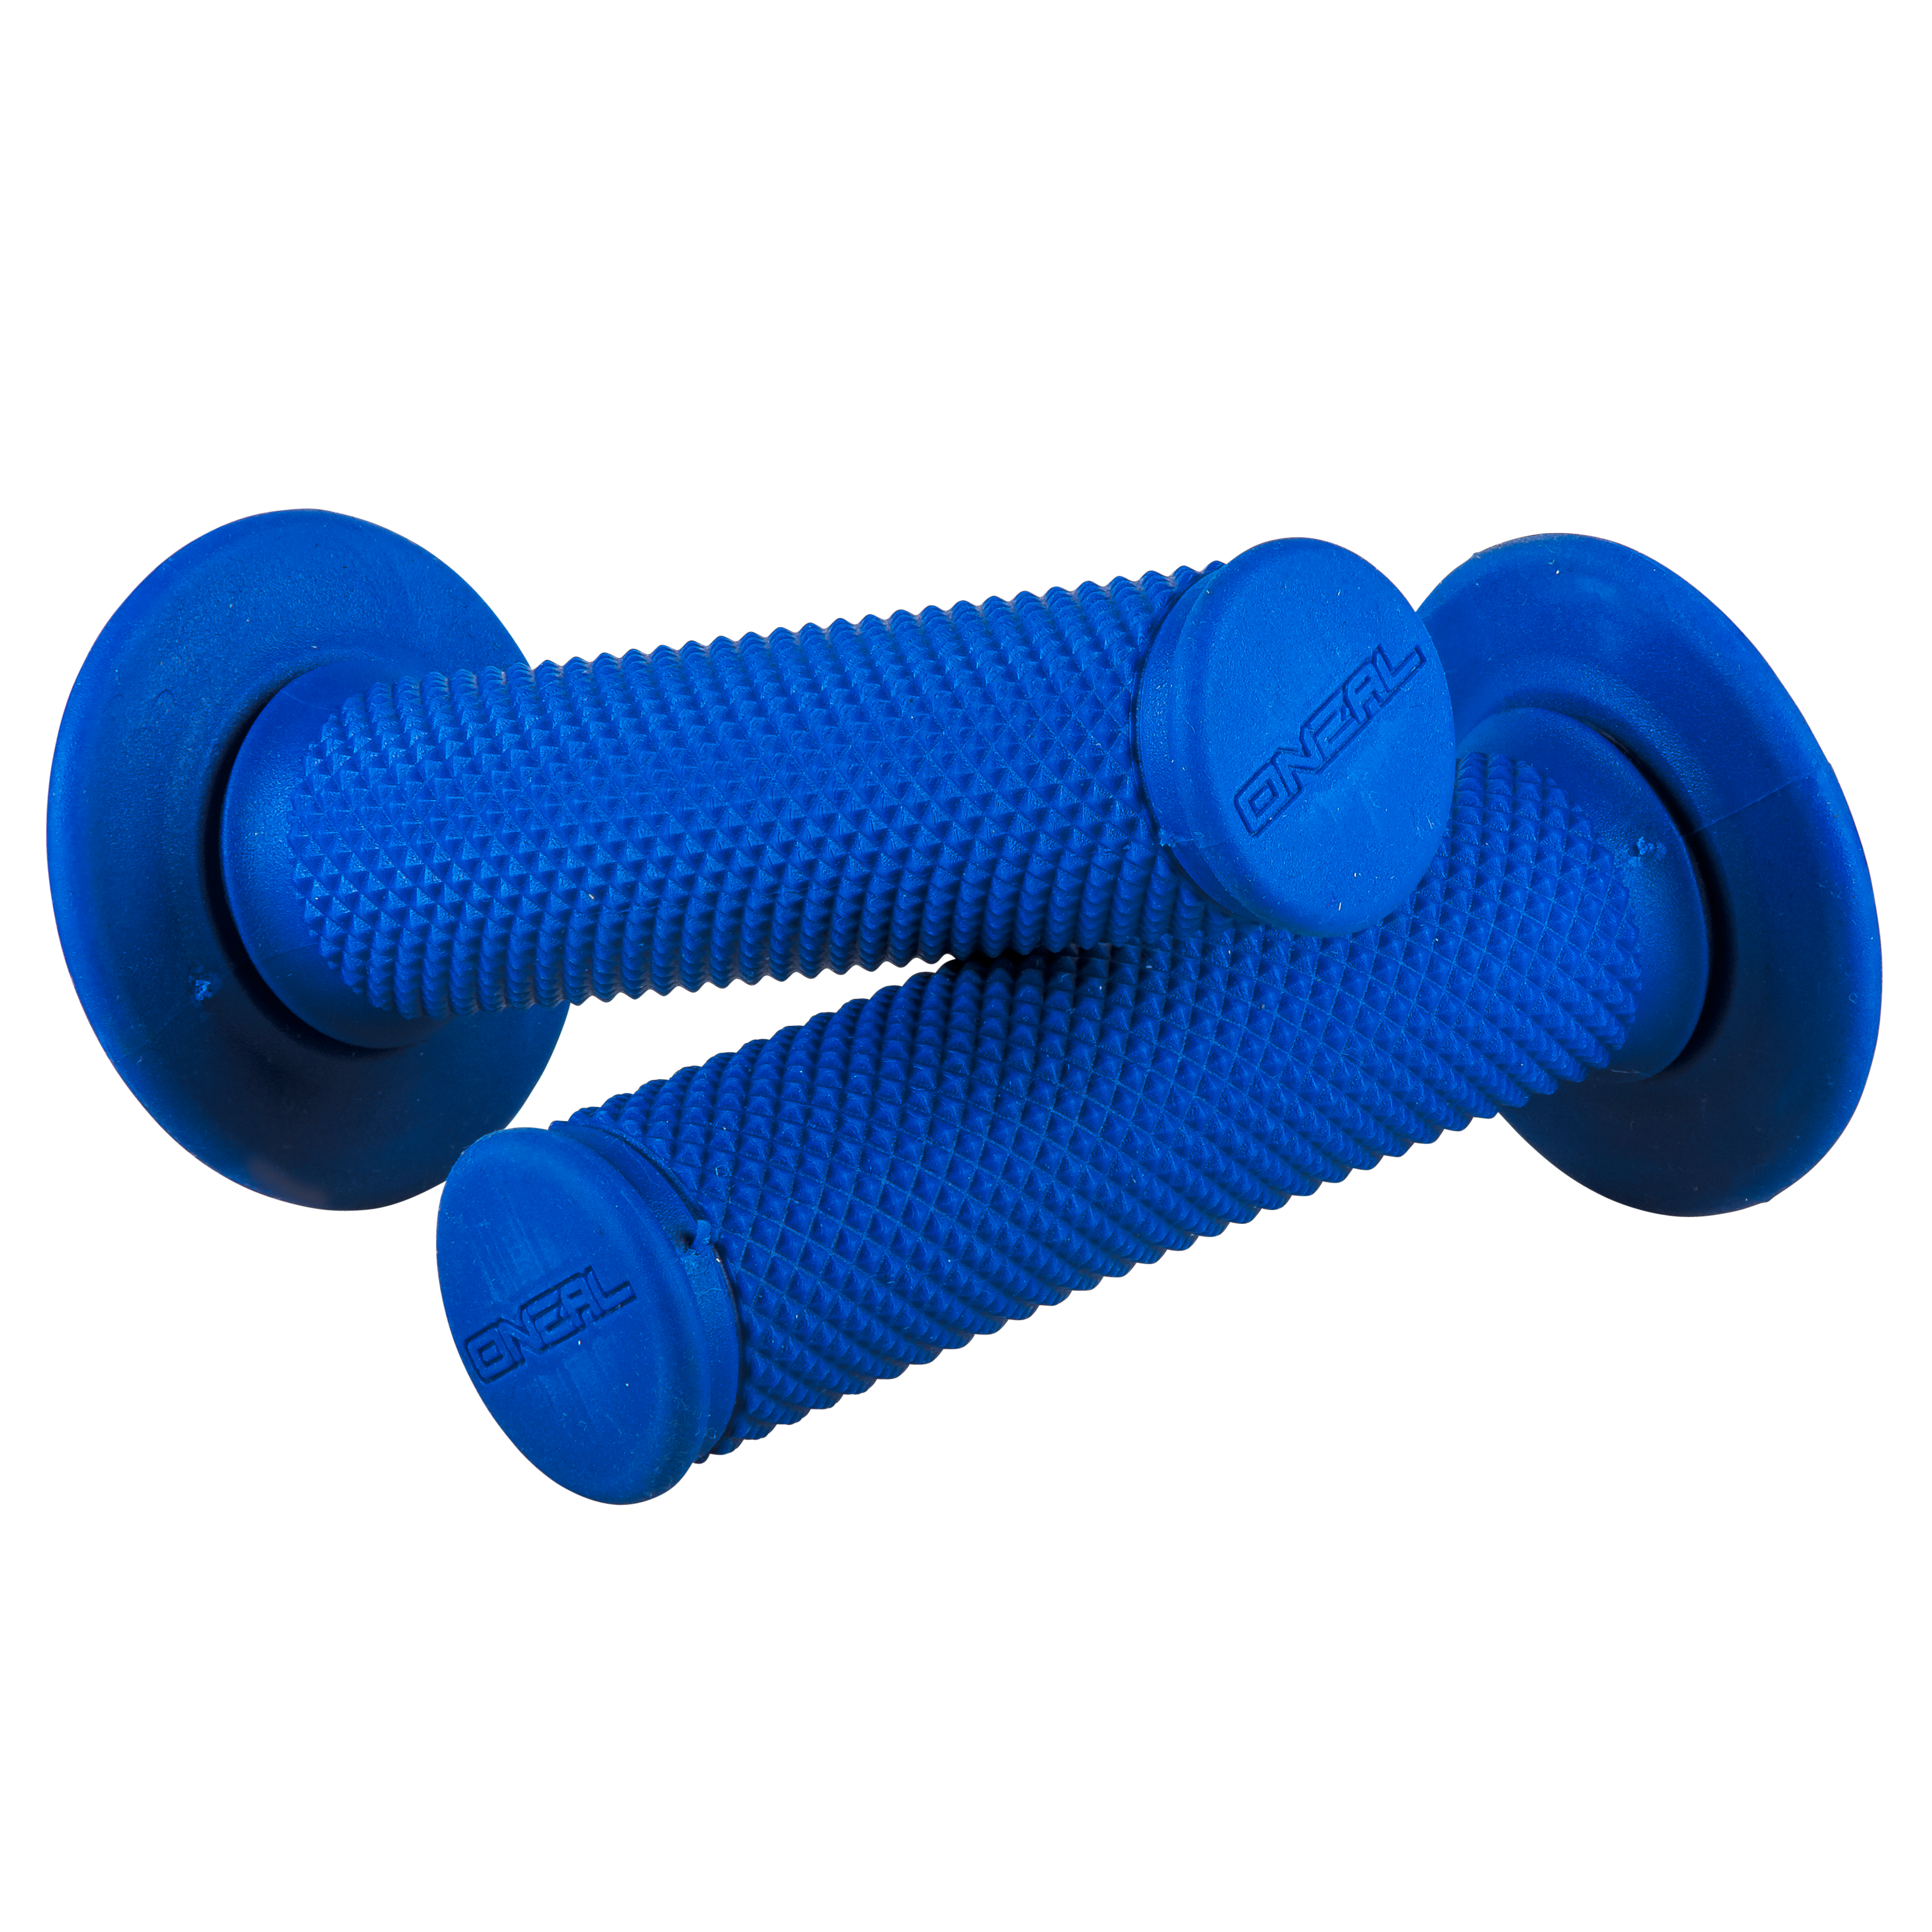 MX GRIP DIAMOND BLUE – AVAILABLE IN SELECTED BIKE SHOPS